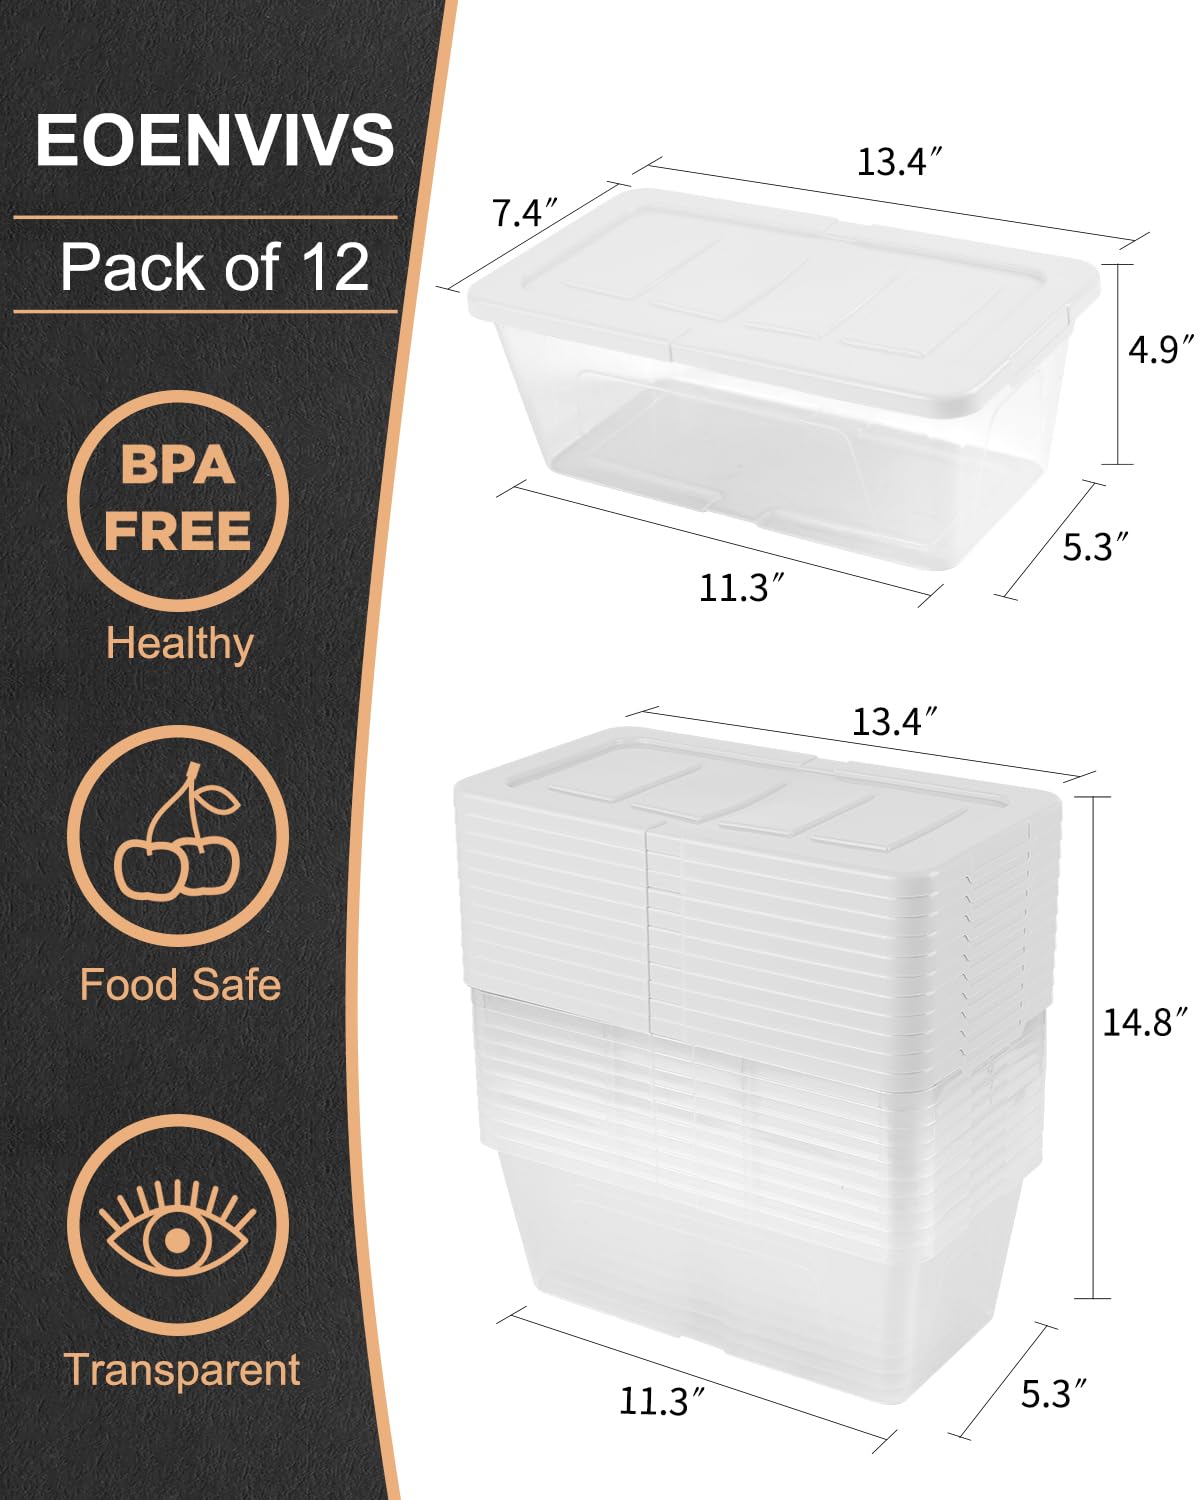 EOENVIVS Plastic Storage Bins 12 Pack Plastic Storage Container with Snap Lids, Stackable Shoe Organizer Boxes Storage Baskets for Organizing Closet Organizers and Storage, Clear+White